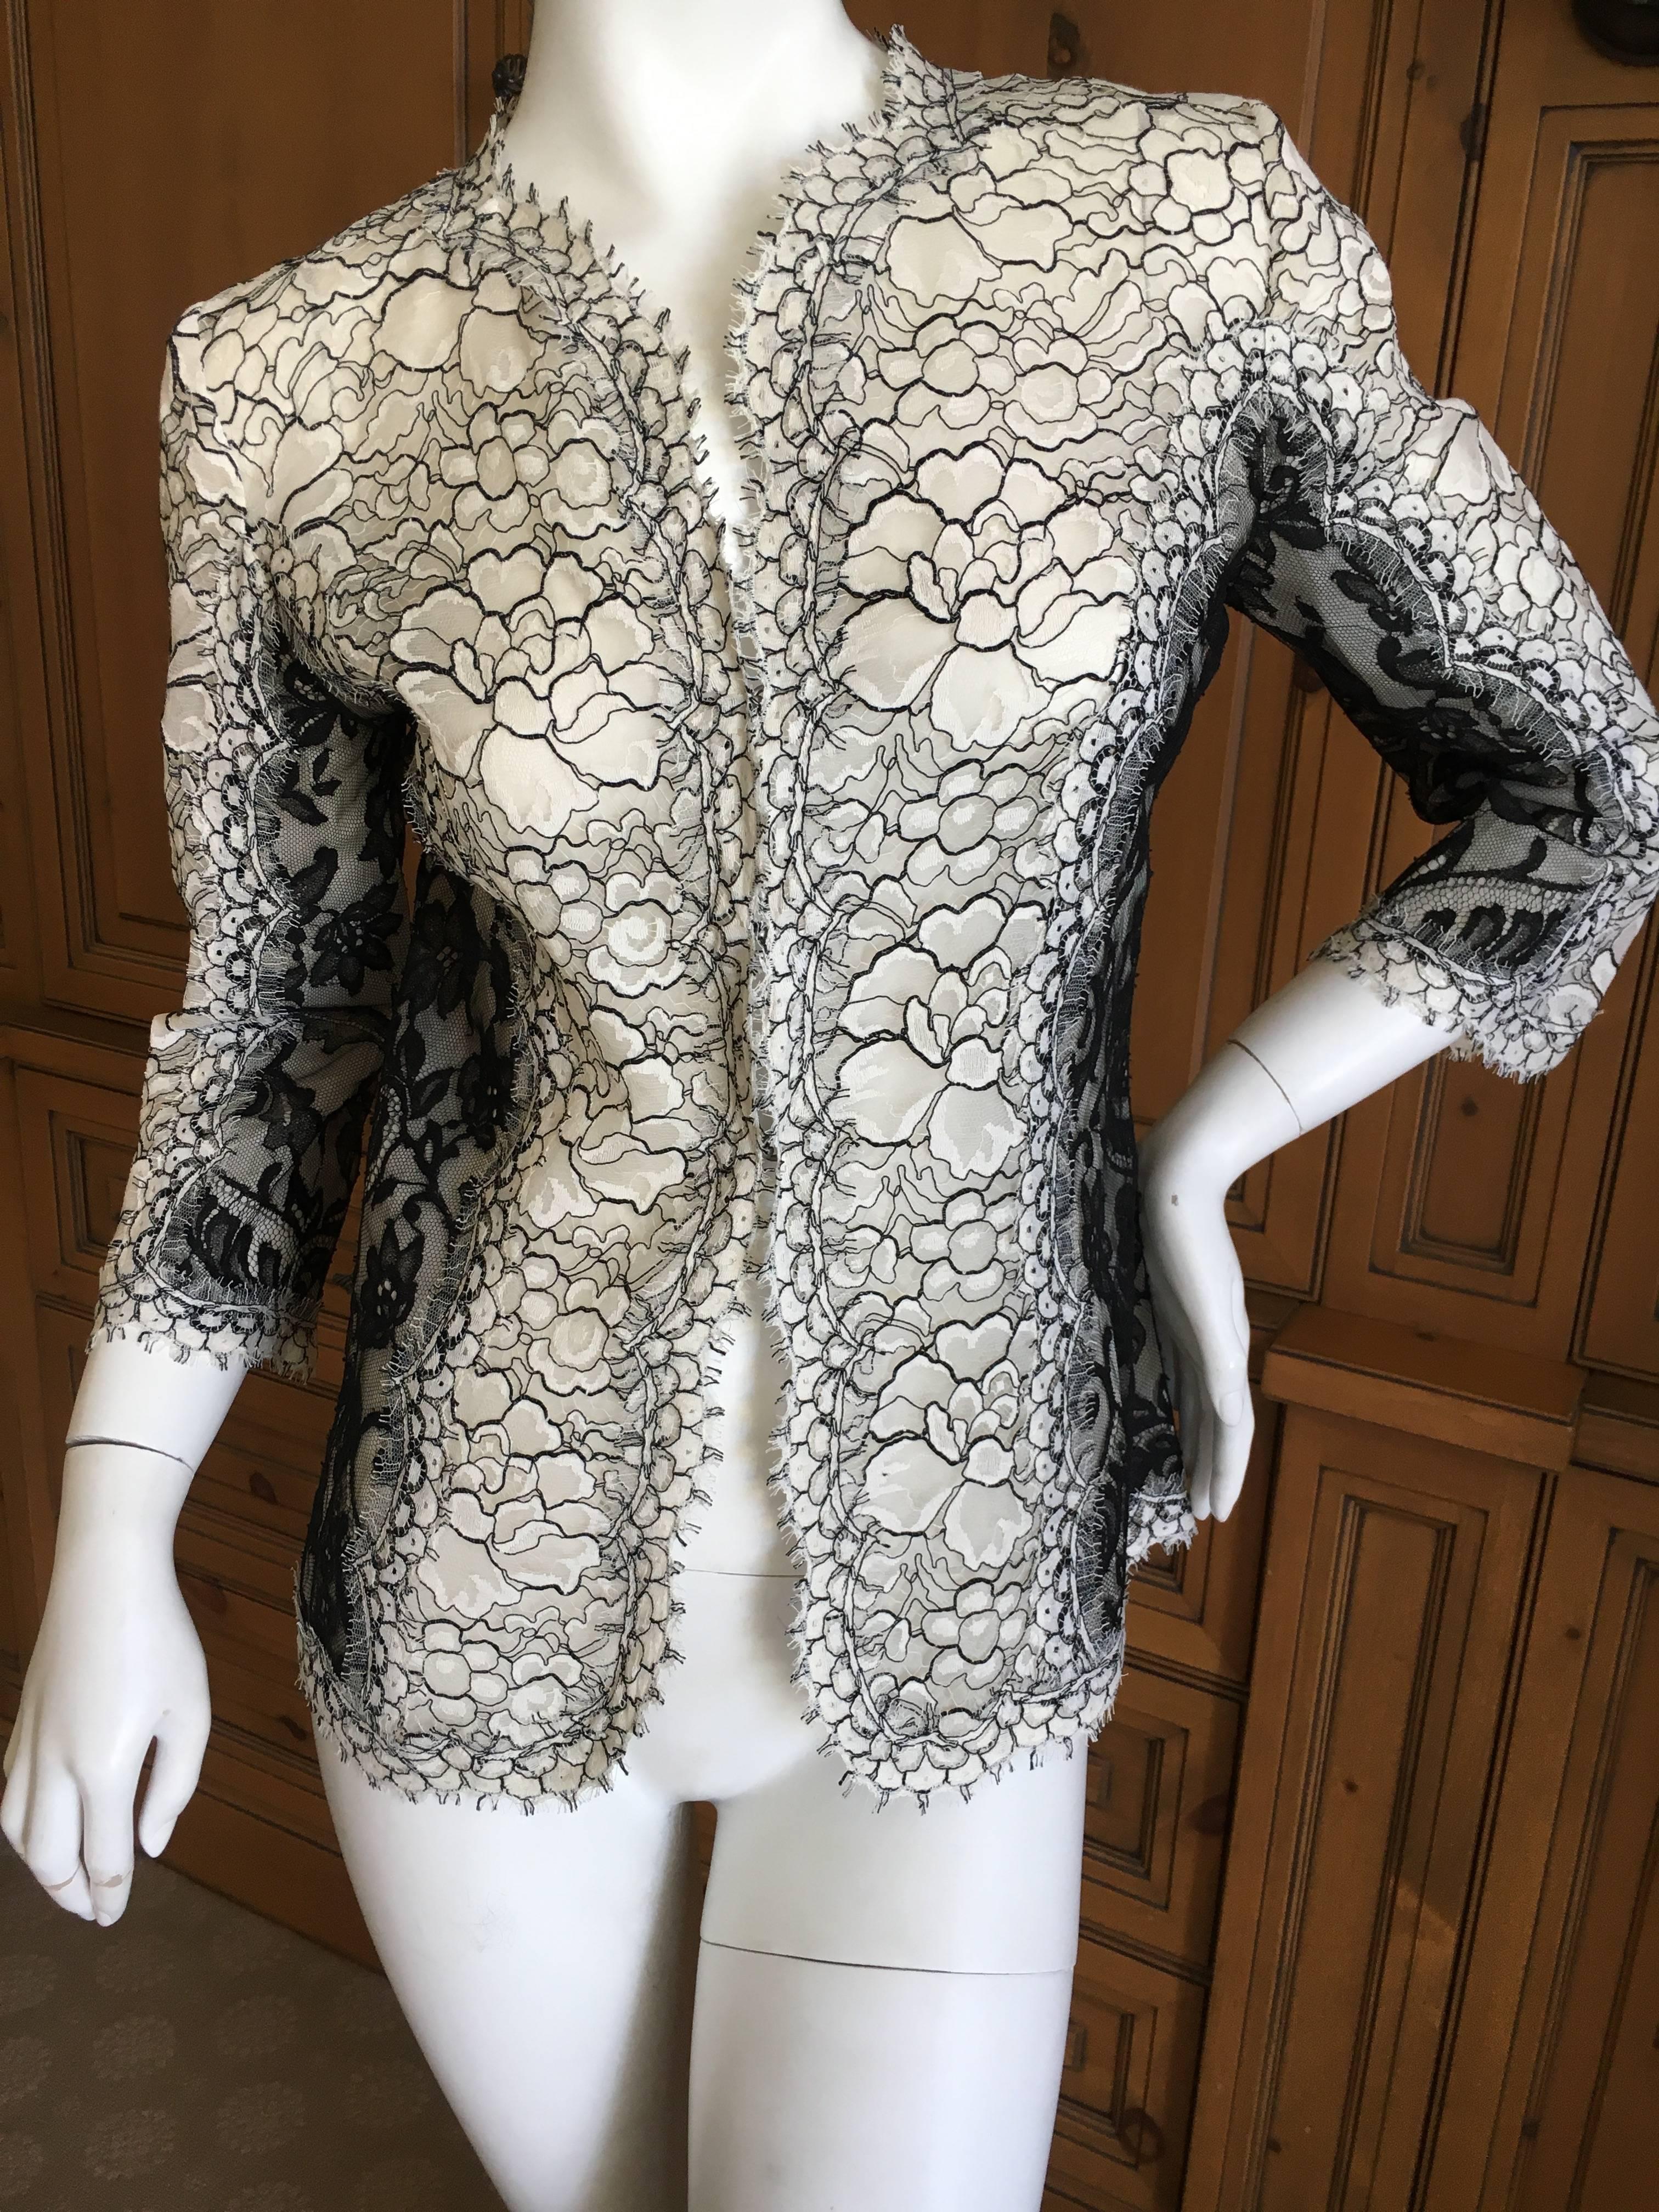 Andrew Gn Paris Floral Lace Jacket In Excellent Condition For Sale In Cloverdale, CA